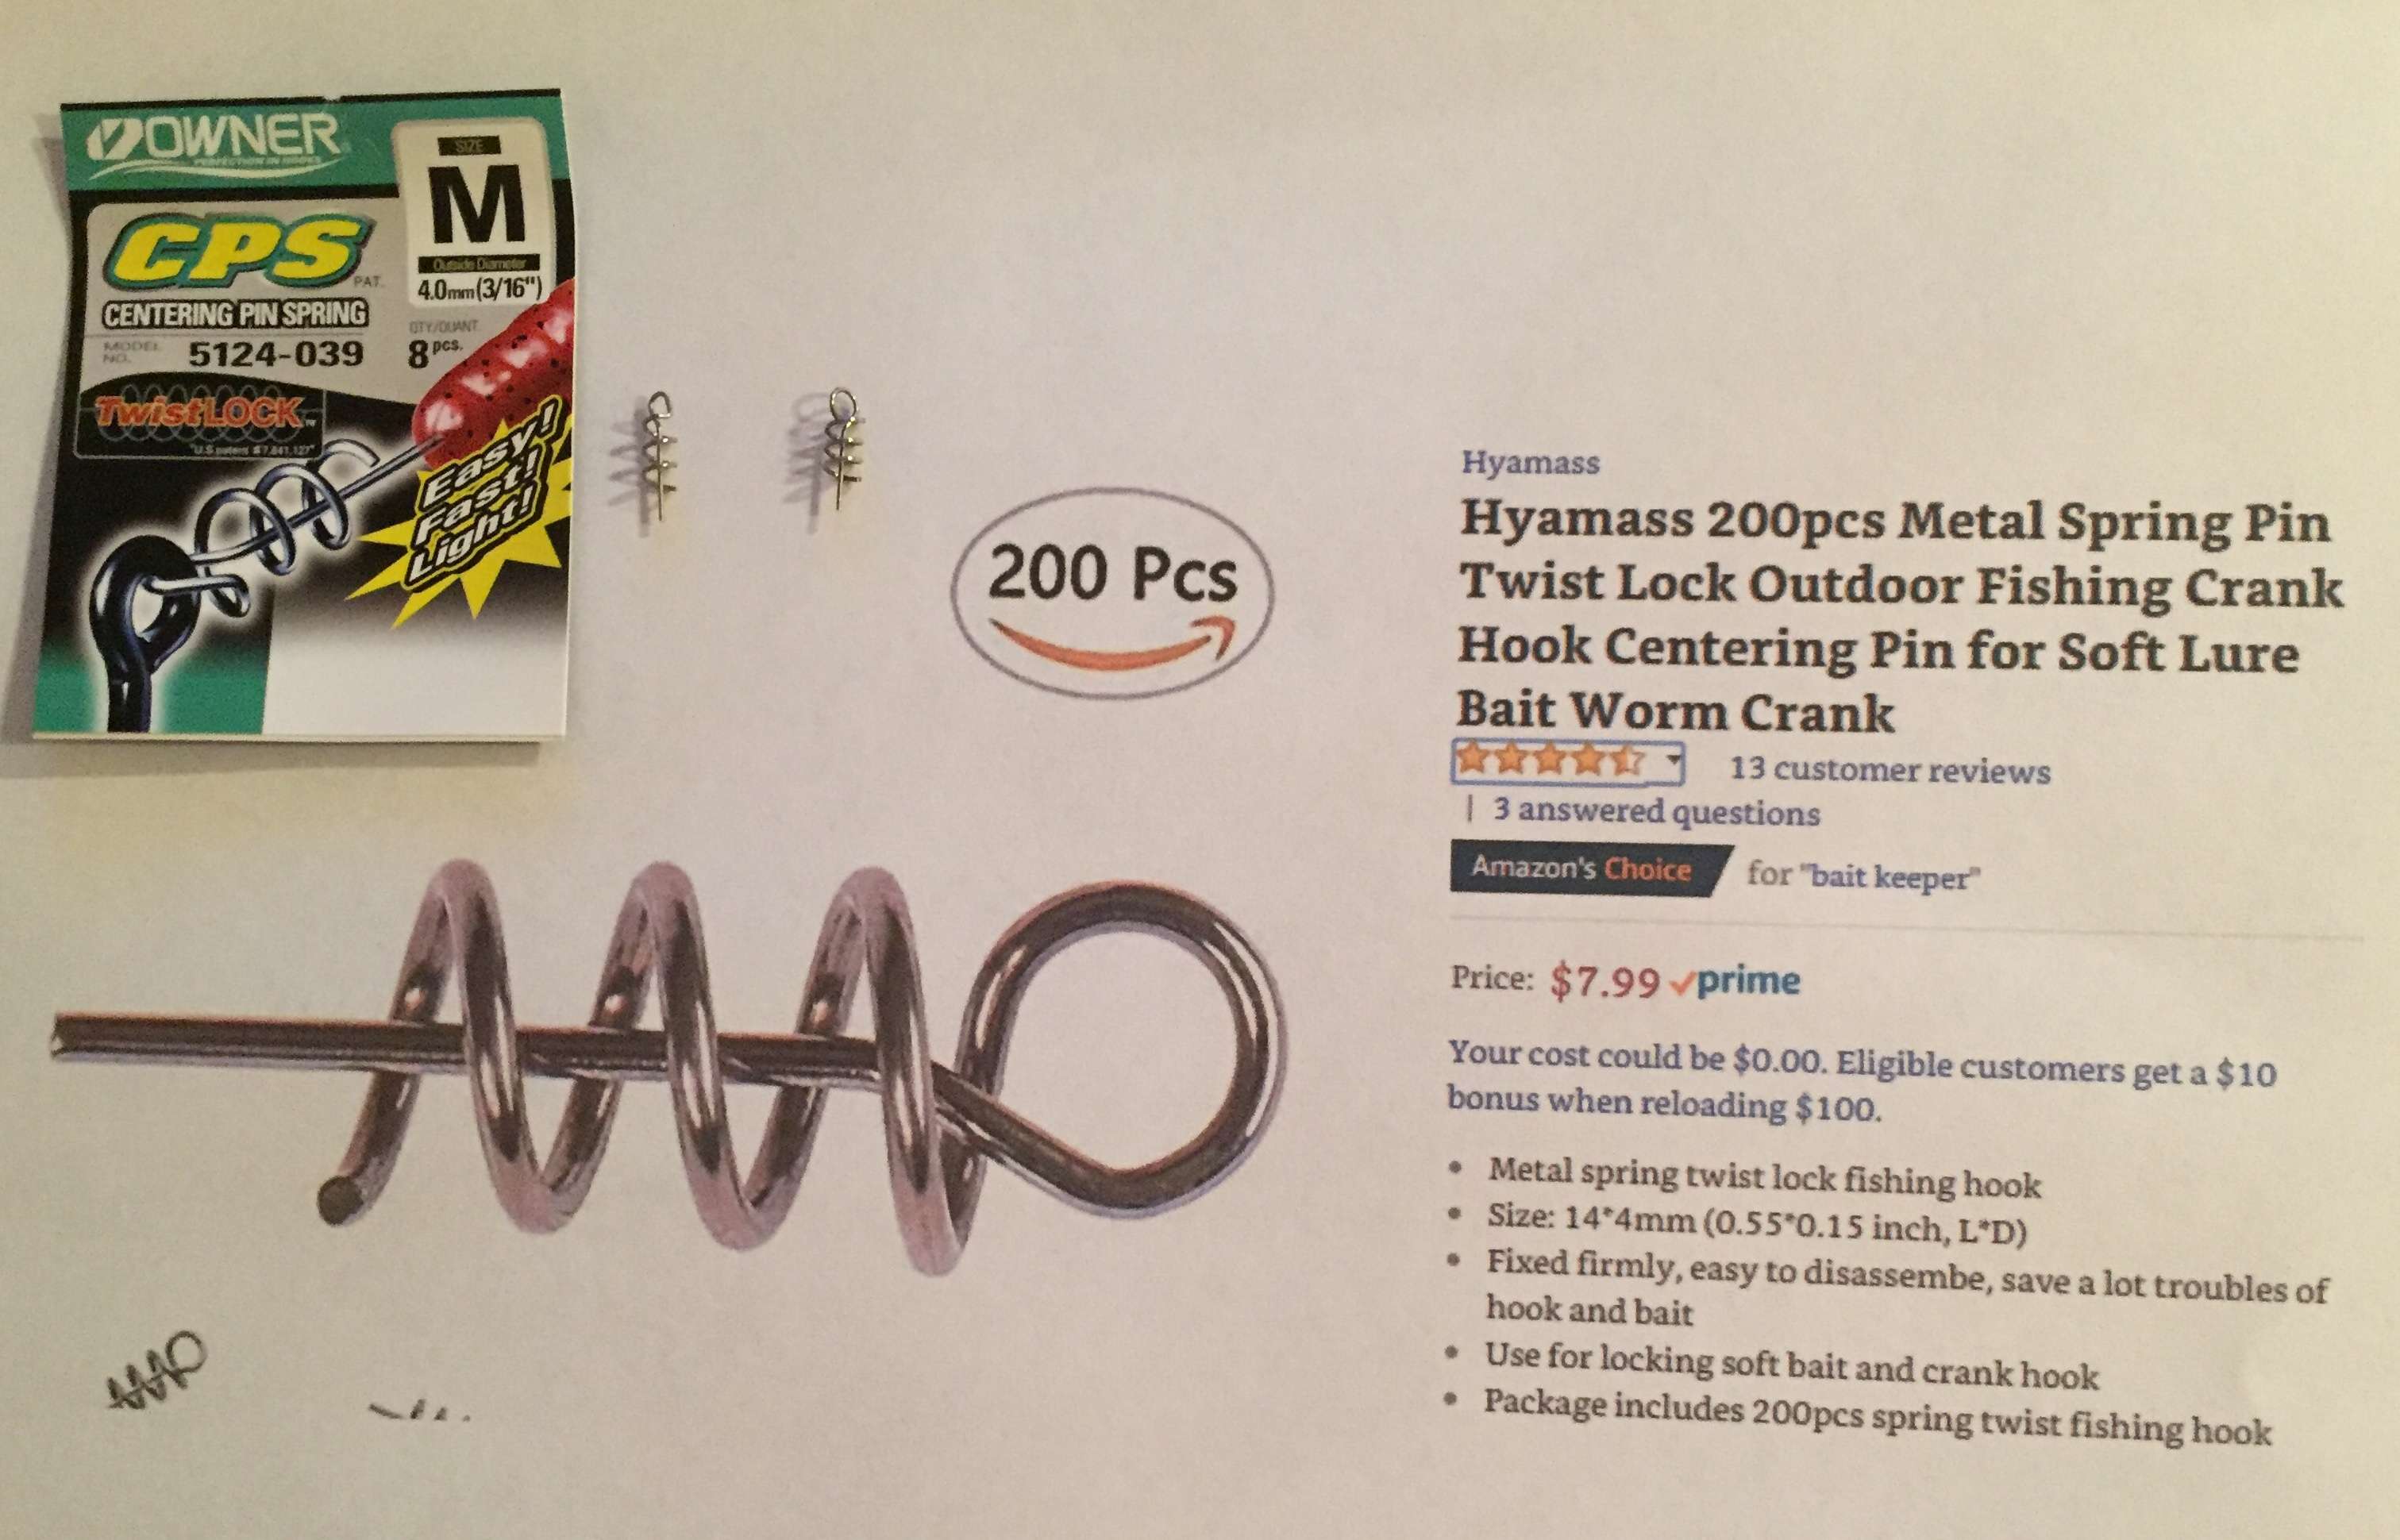 Anyone use Hyamass Spring Pin Twistlock as a replaxement for Owner CPS  Centering Pin Spring Twistlock? - Fishing Tackle - Bass Fishing Forums